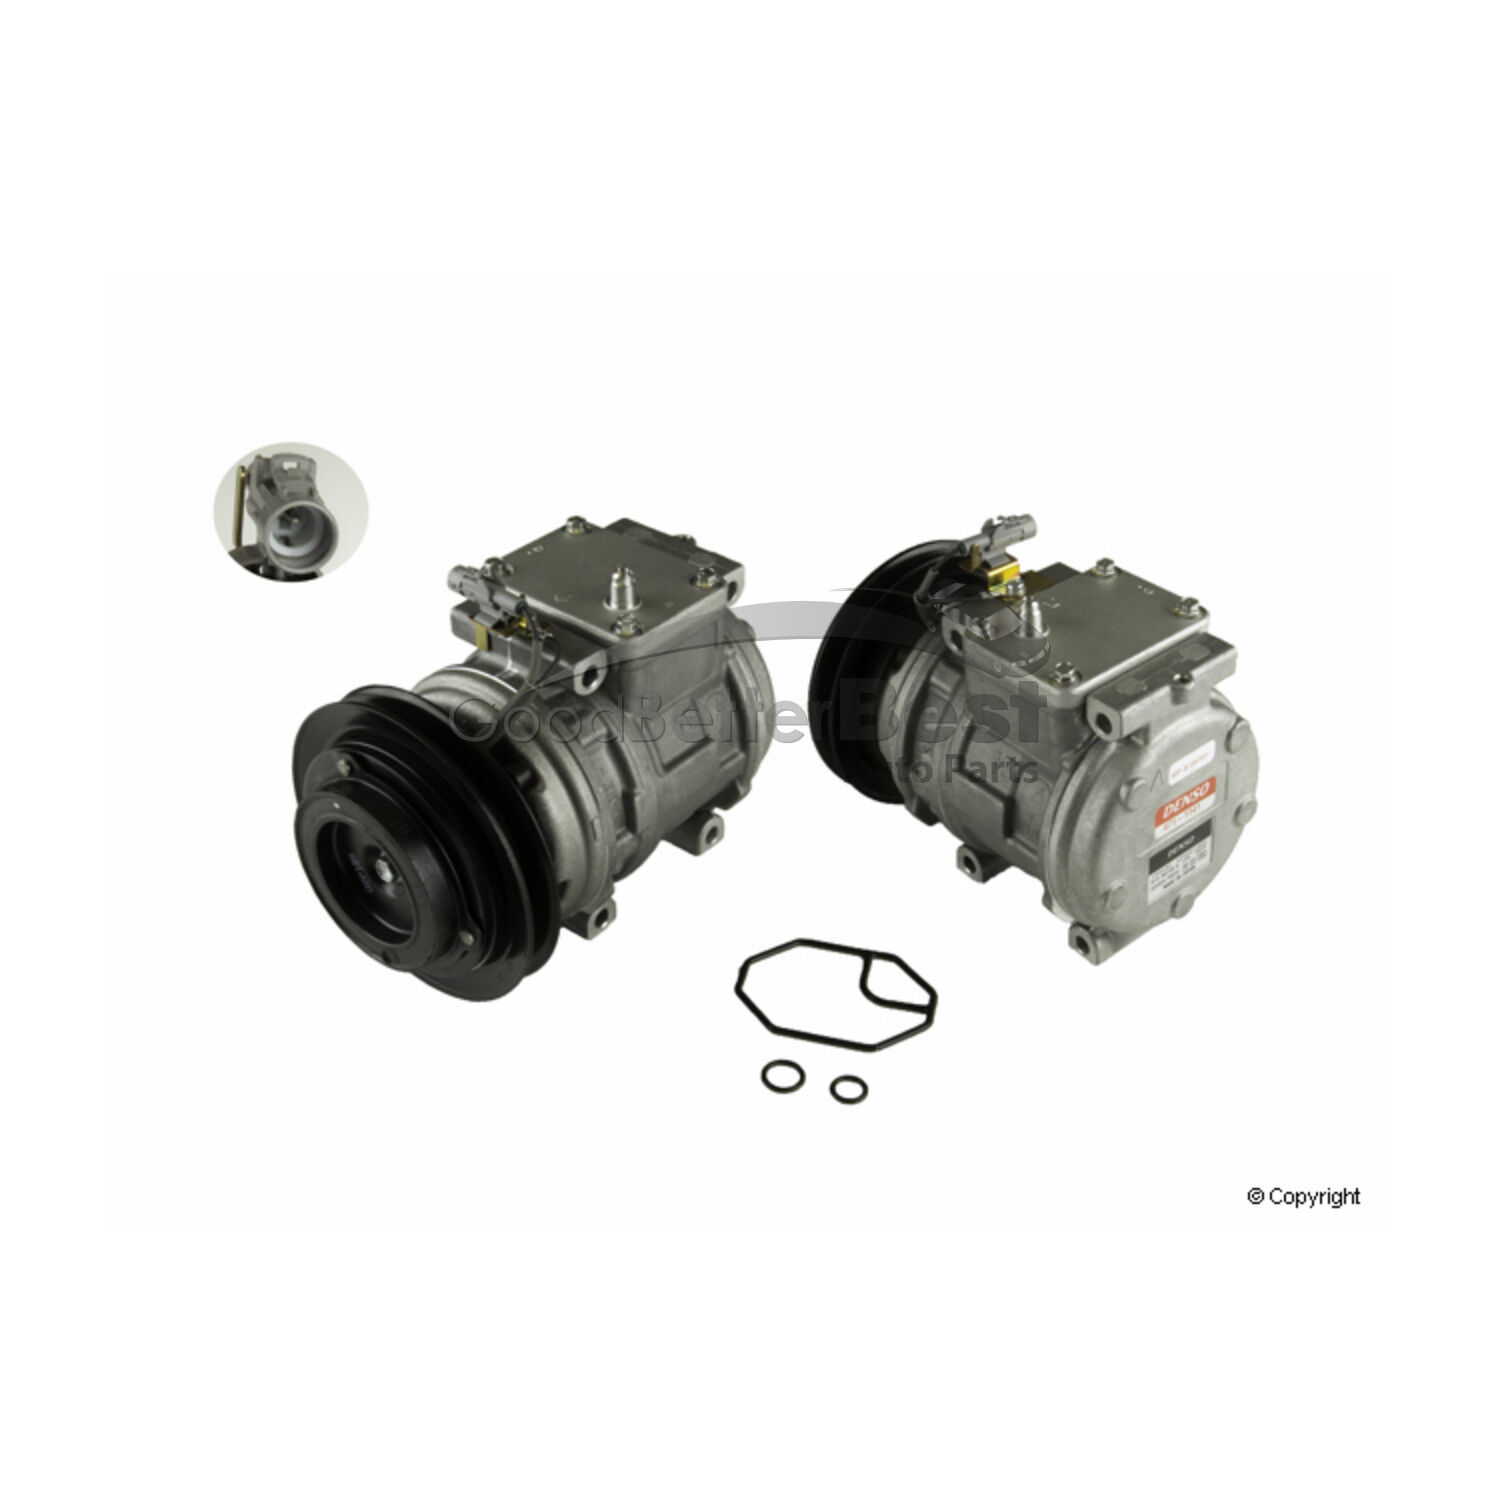 One New DENSO A/C Compressor 4711141 for Toyota Pickup